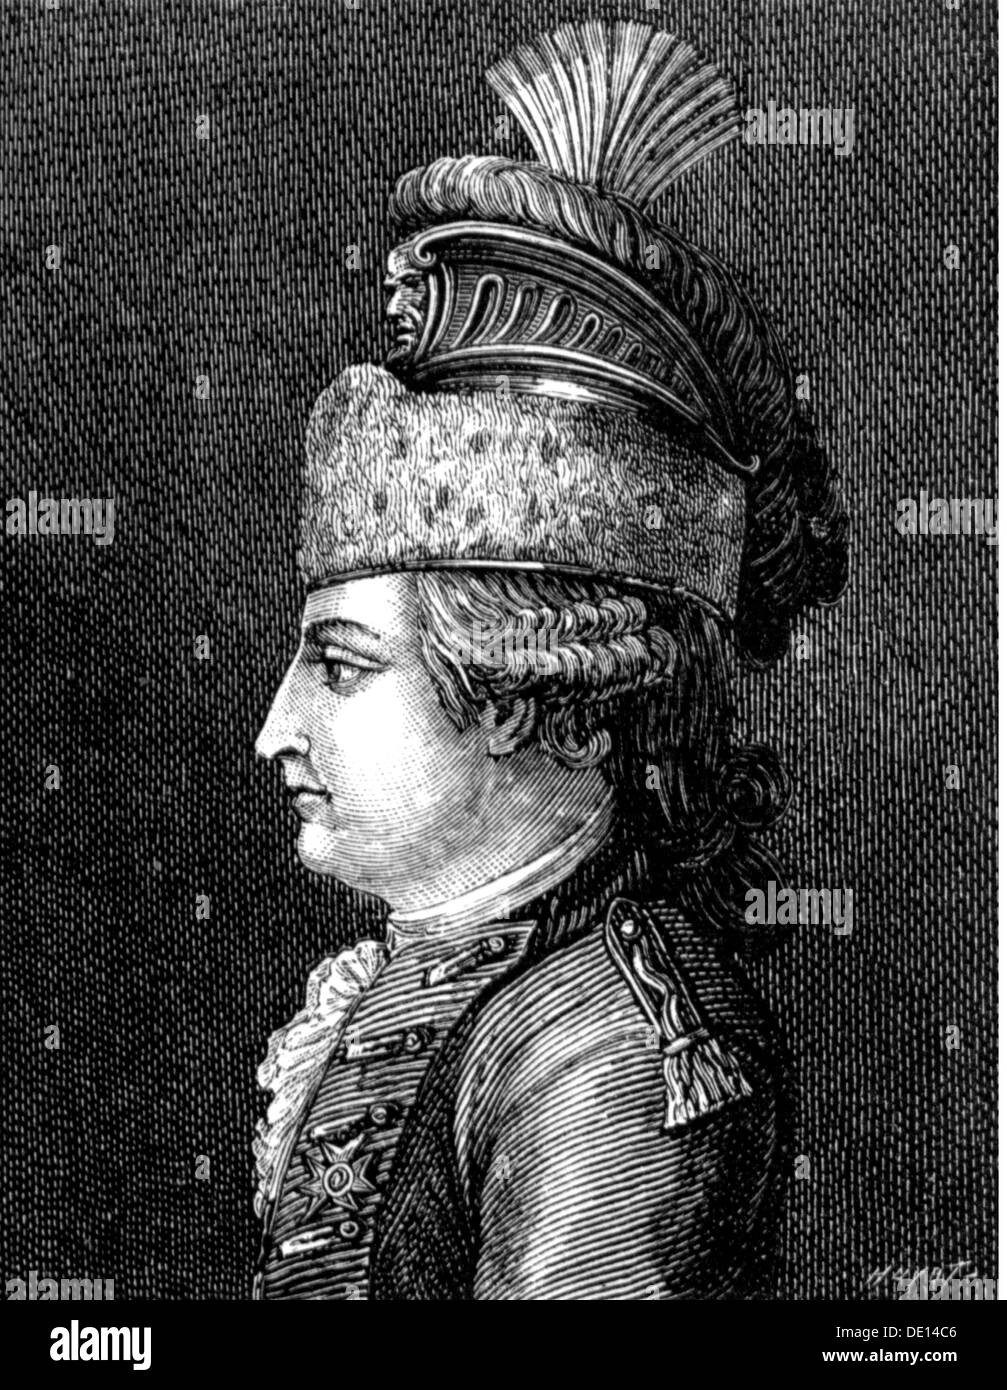 military, France, army, cavalry, officer of the dragoons, 2nd half 18th century, portrait, after contemporary copper engraving, armed forces, soldiers, soldier, uniform, uniforms, headpiece, headpieces, leather helmet, Kingdom of France, Ancien regime, people, man, men, male, insignia of rank, badge of rank, epaulette, shoulder strap, epaulettes, shoulder straps, army, armies, cavalry, cavalries, officer, officers, historic, historical, Artist's Copyright has not to be cleared Stock Photo